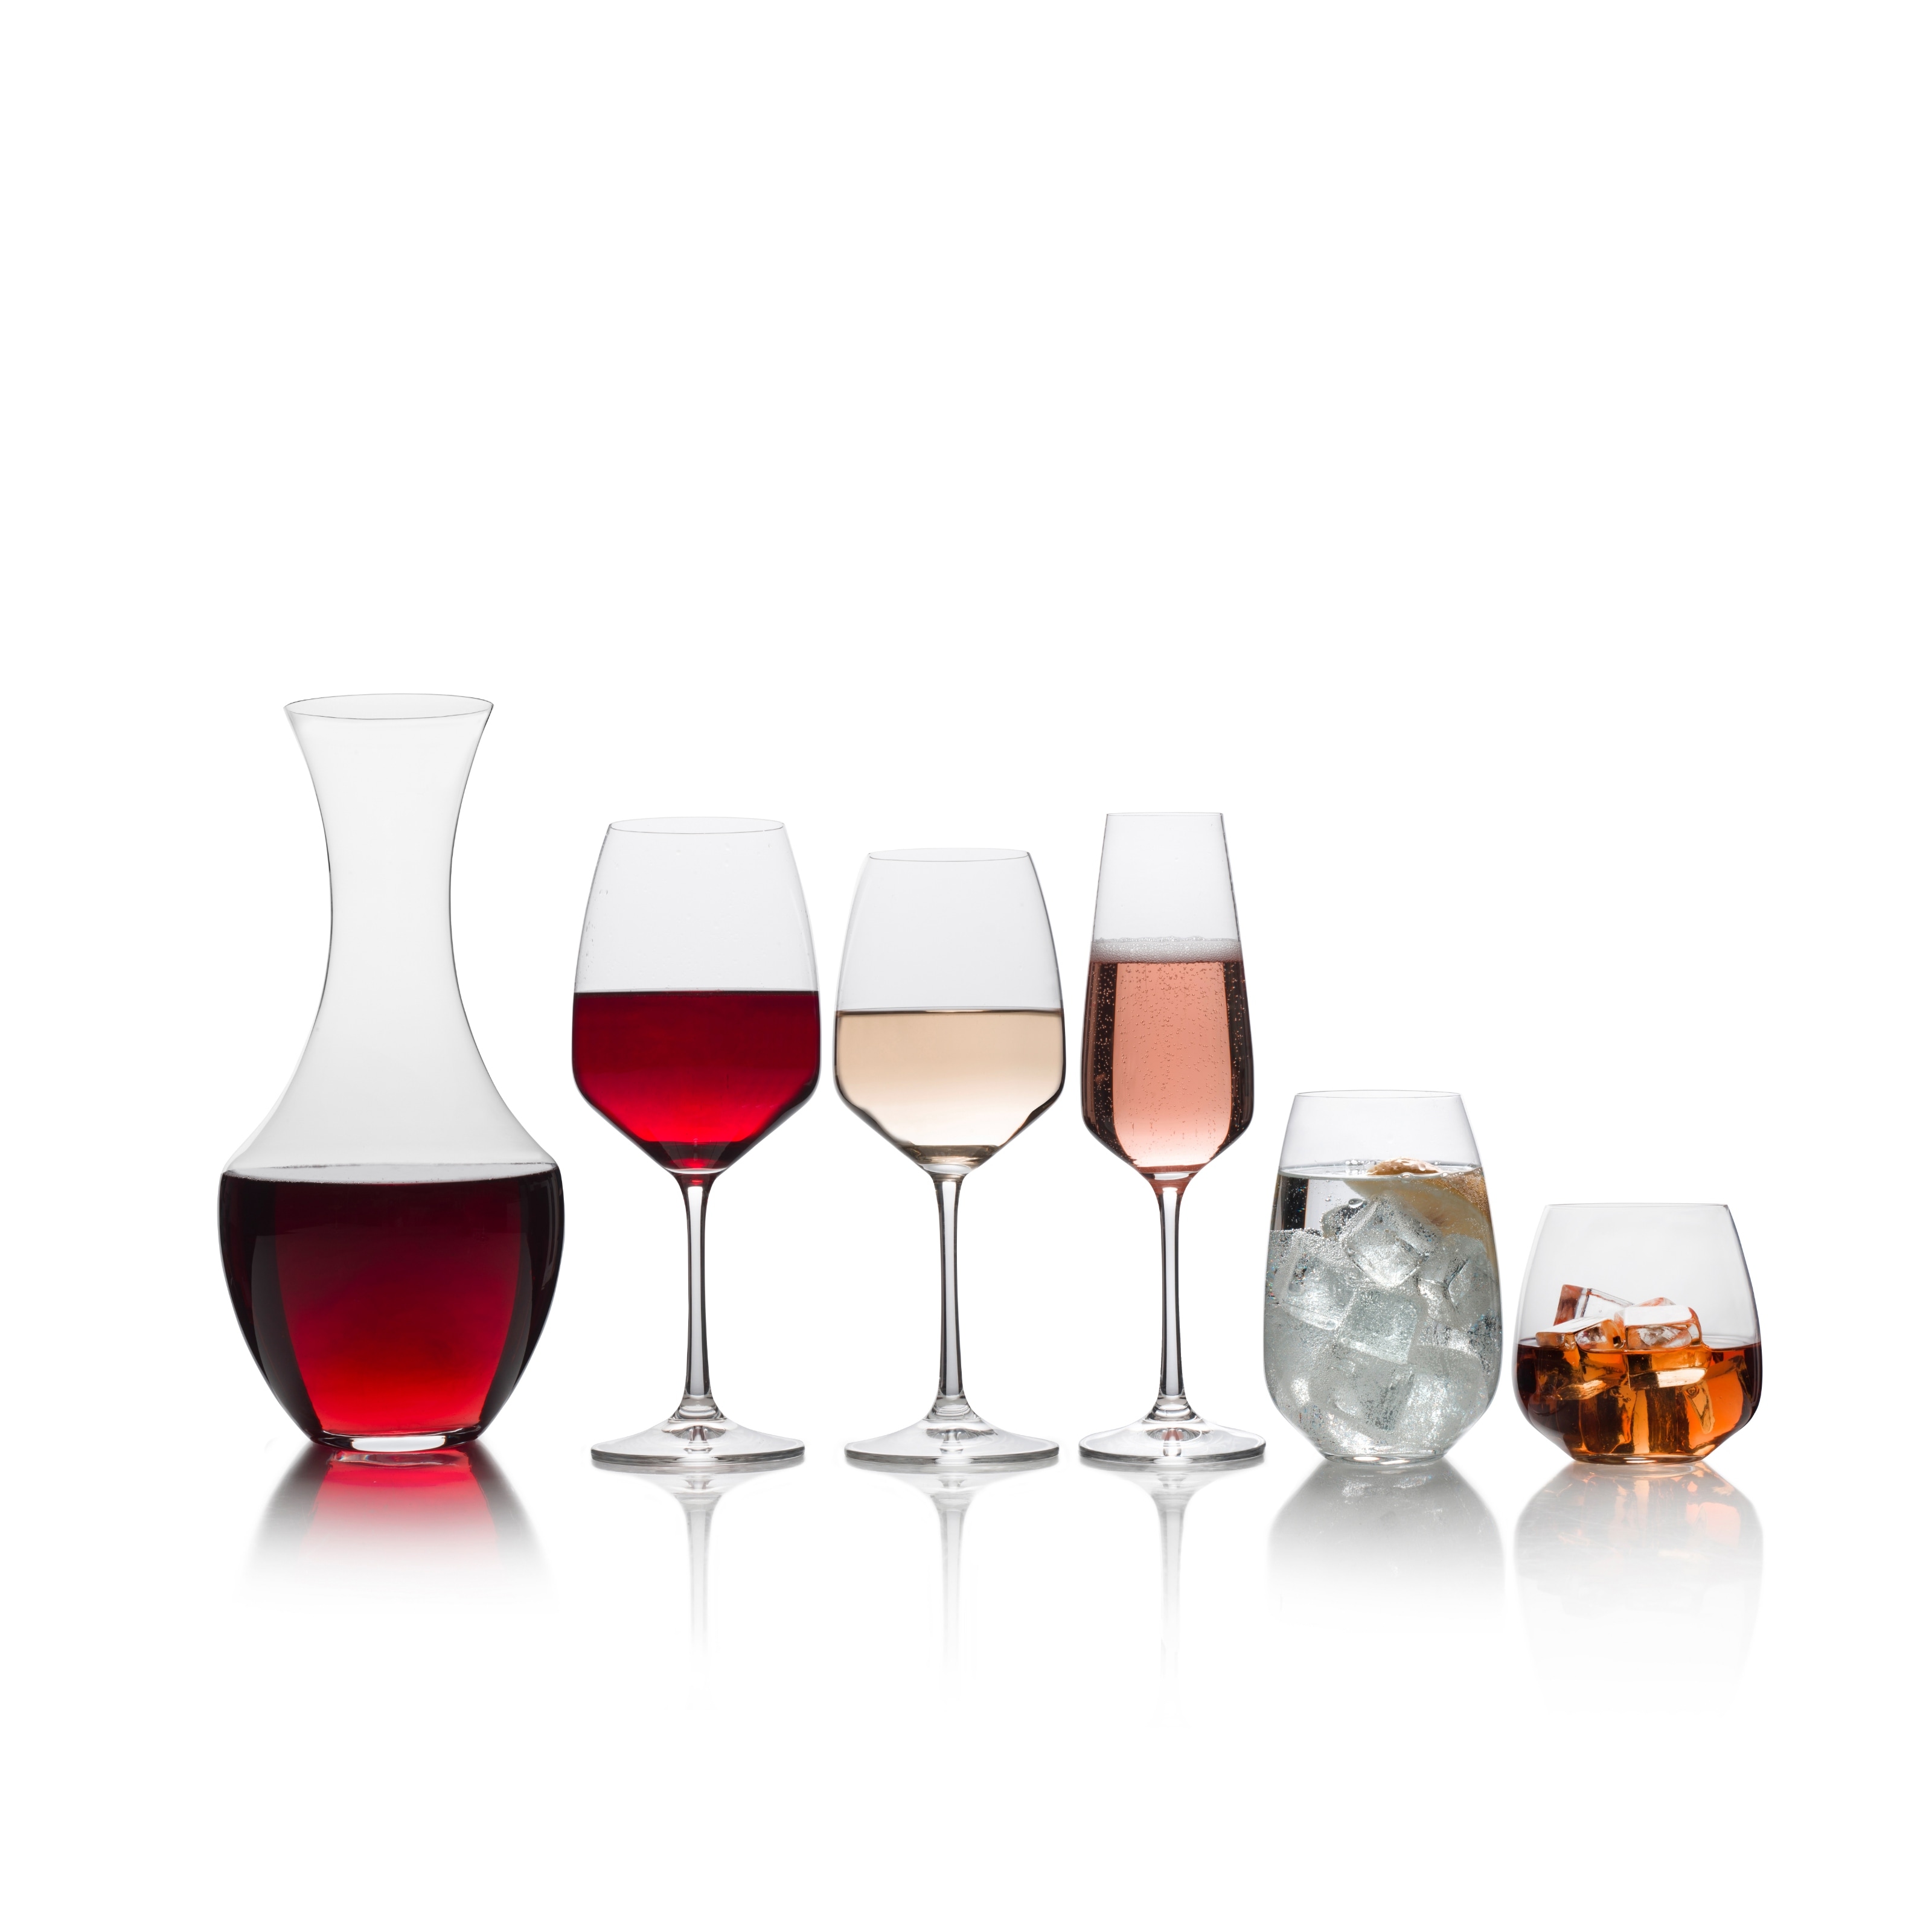 https://ak1.ostkcdn.com/images/products/is/images/direct/5f72e562a0e96fbc11804e29656015ca9e3d36e4/Mikasa-Melody-15OZ-White-Wine-Glass-%28Set-of-4%29.jpg